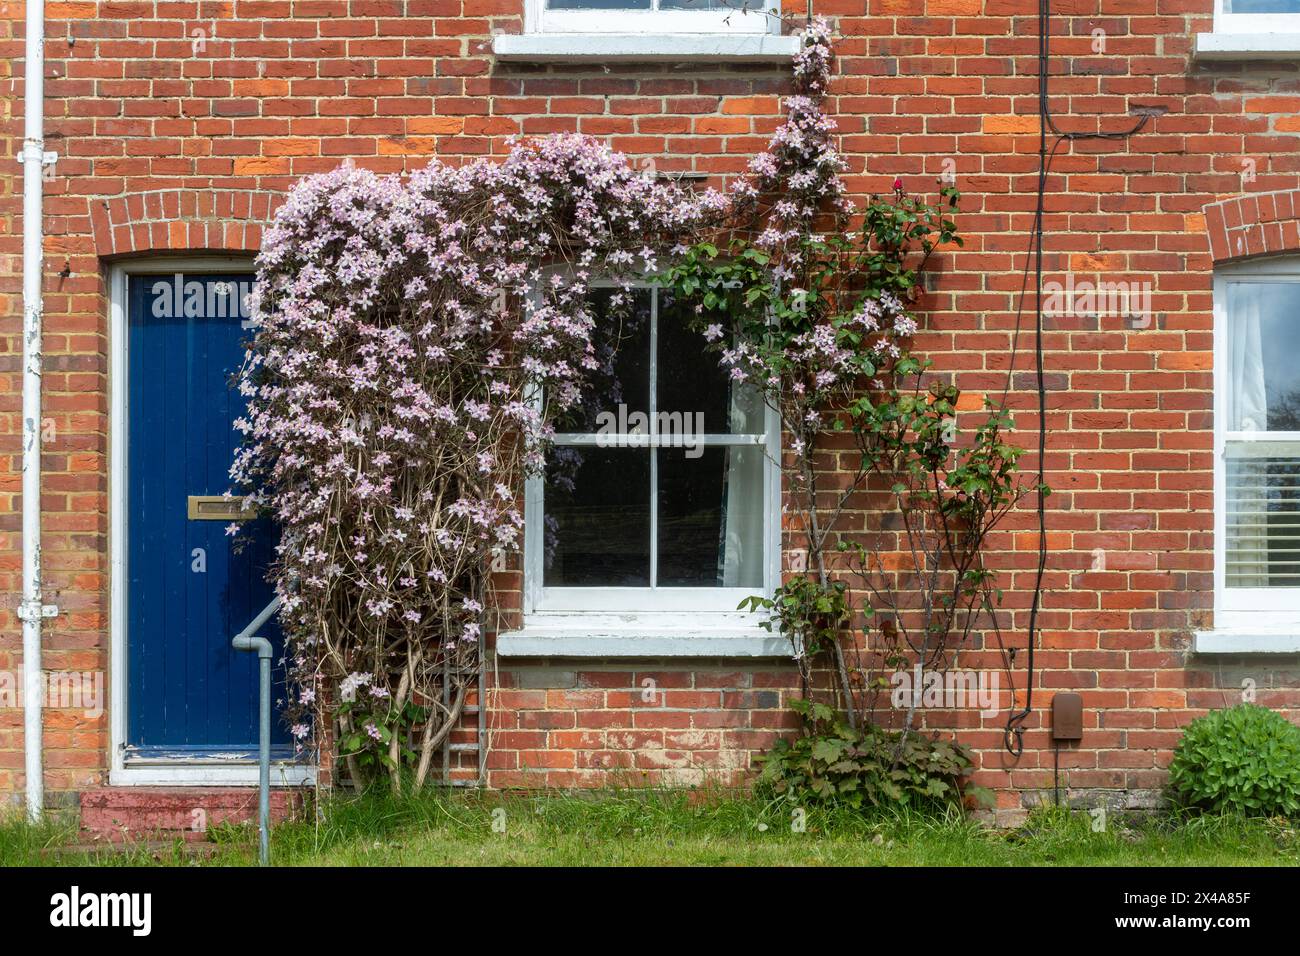 Flowering clematis, climbing plants growing around the window and door of a house, England, UK, during spring Stock Photo